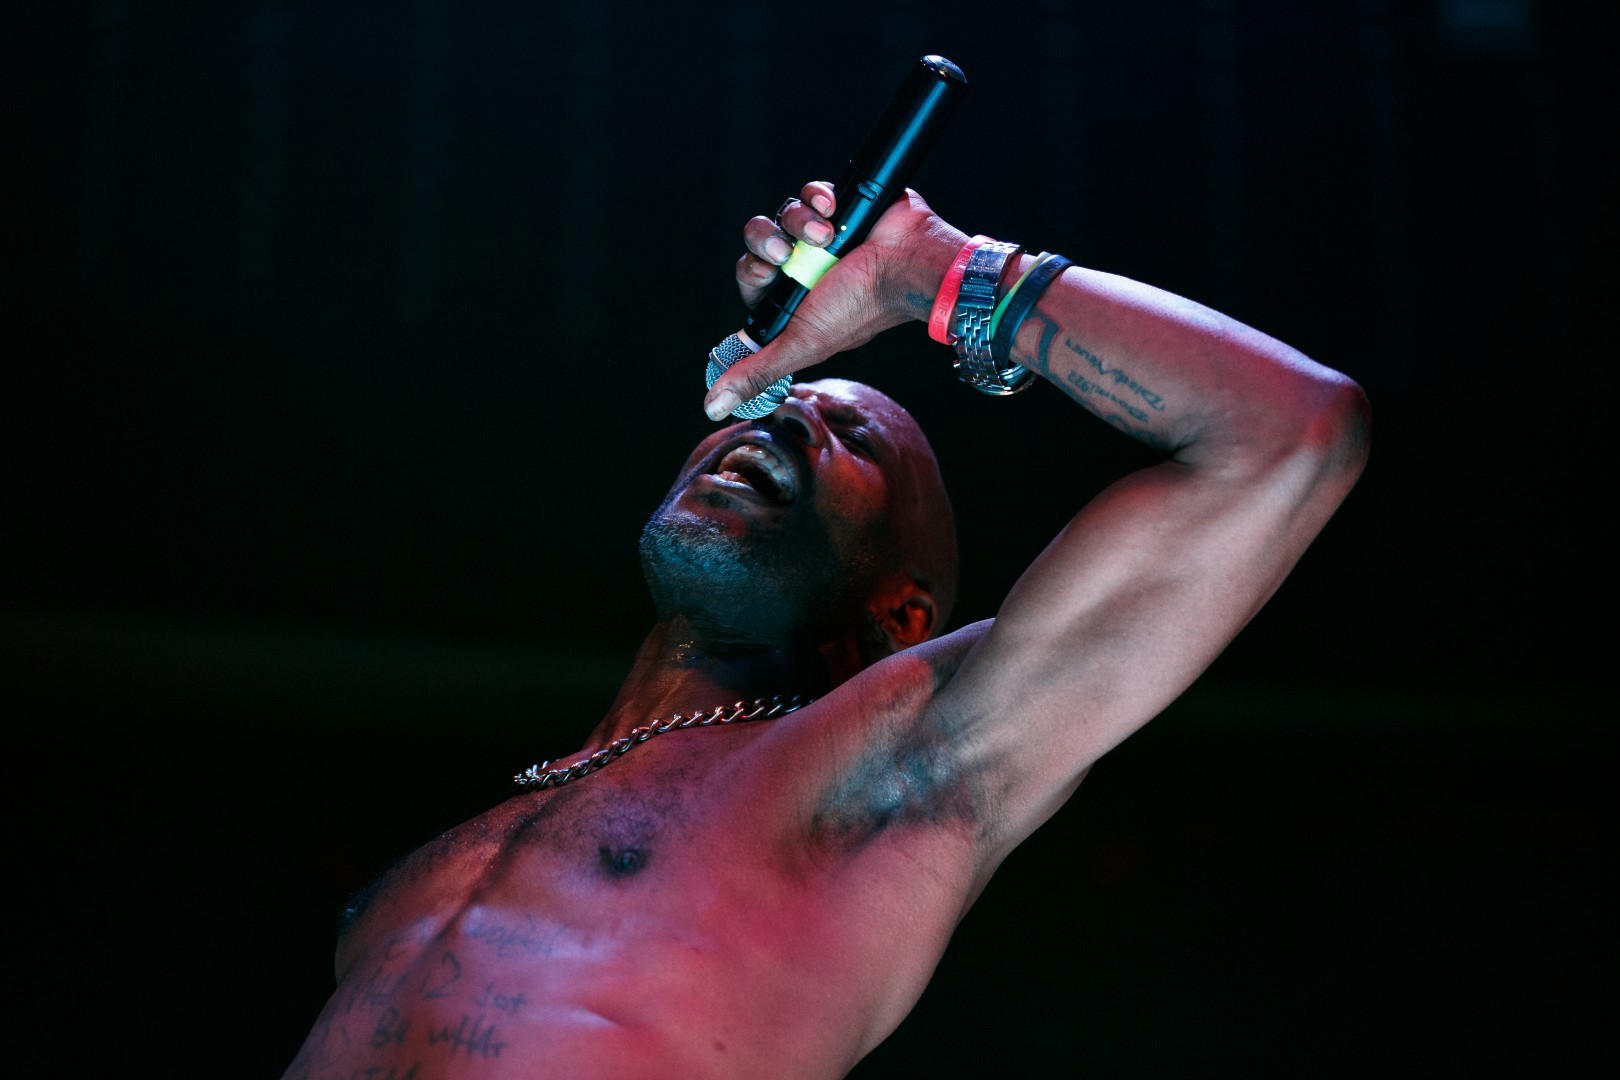 DMX at Club One in Bucharest on March 28, 2015 (d8edf2c74e)